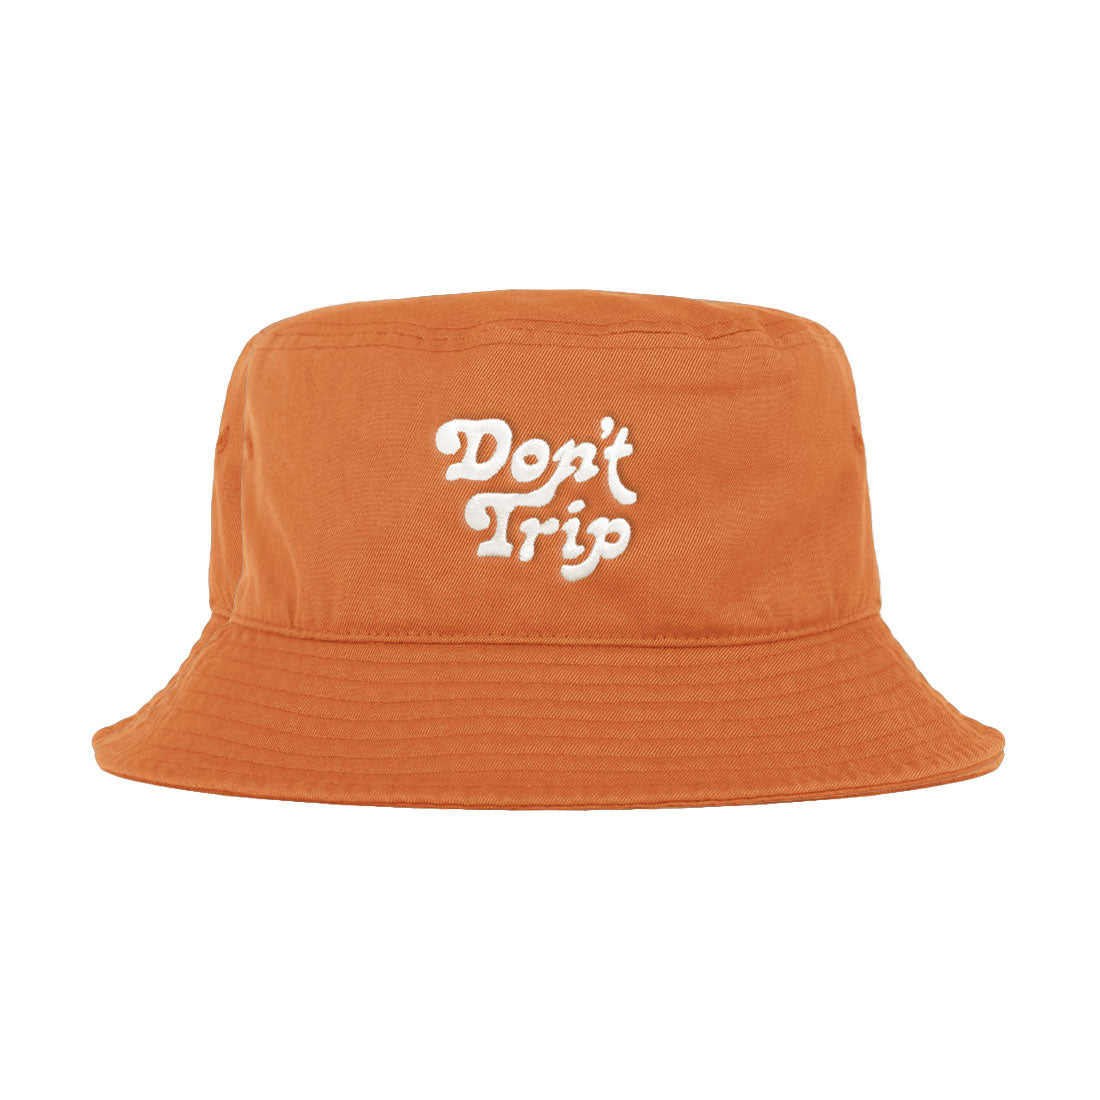 Free & Easy Don't Trip Bucket Hat in orange with white Don't Trip embroidery on a white background -Free & Easy